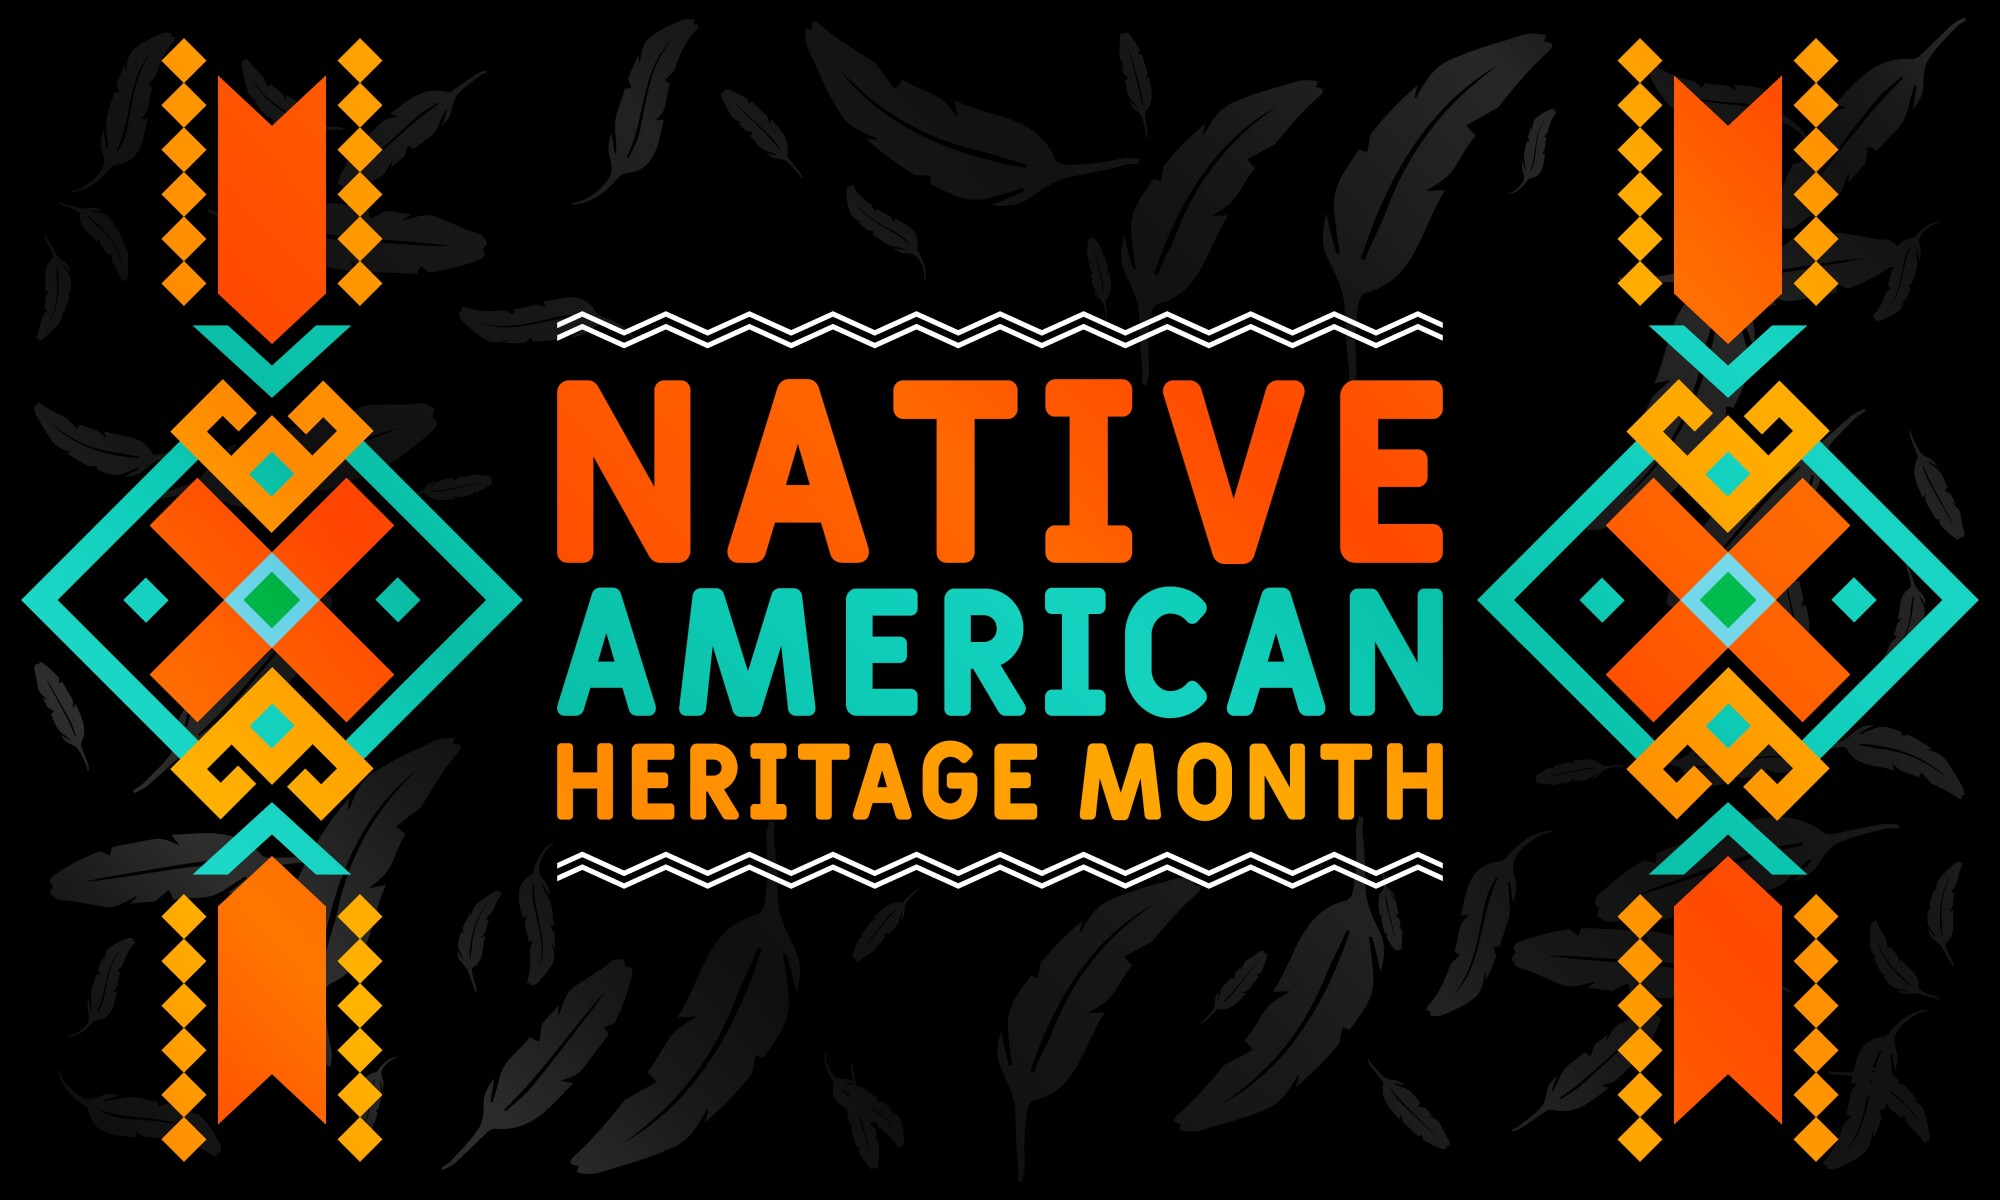 The words Native American Heritage Month with diamond-shaped designs on each side